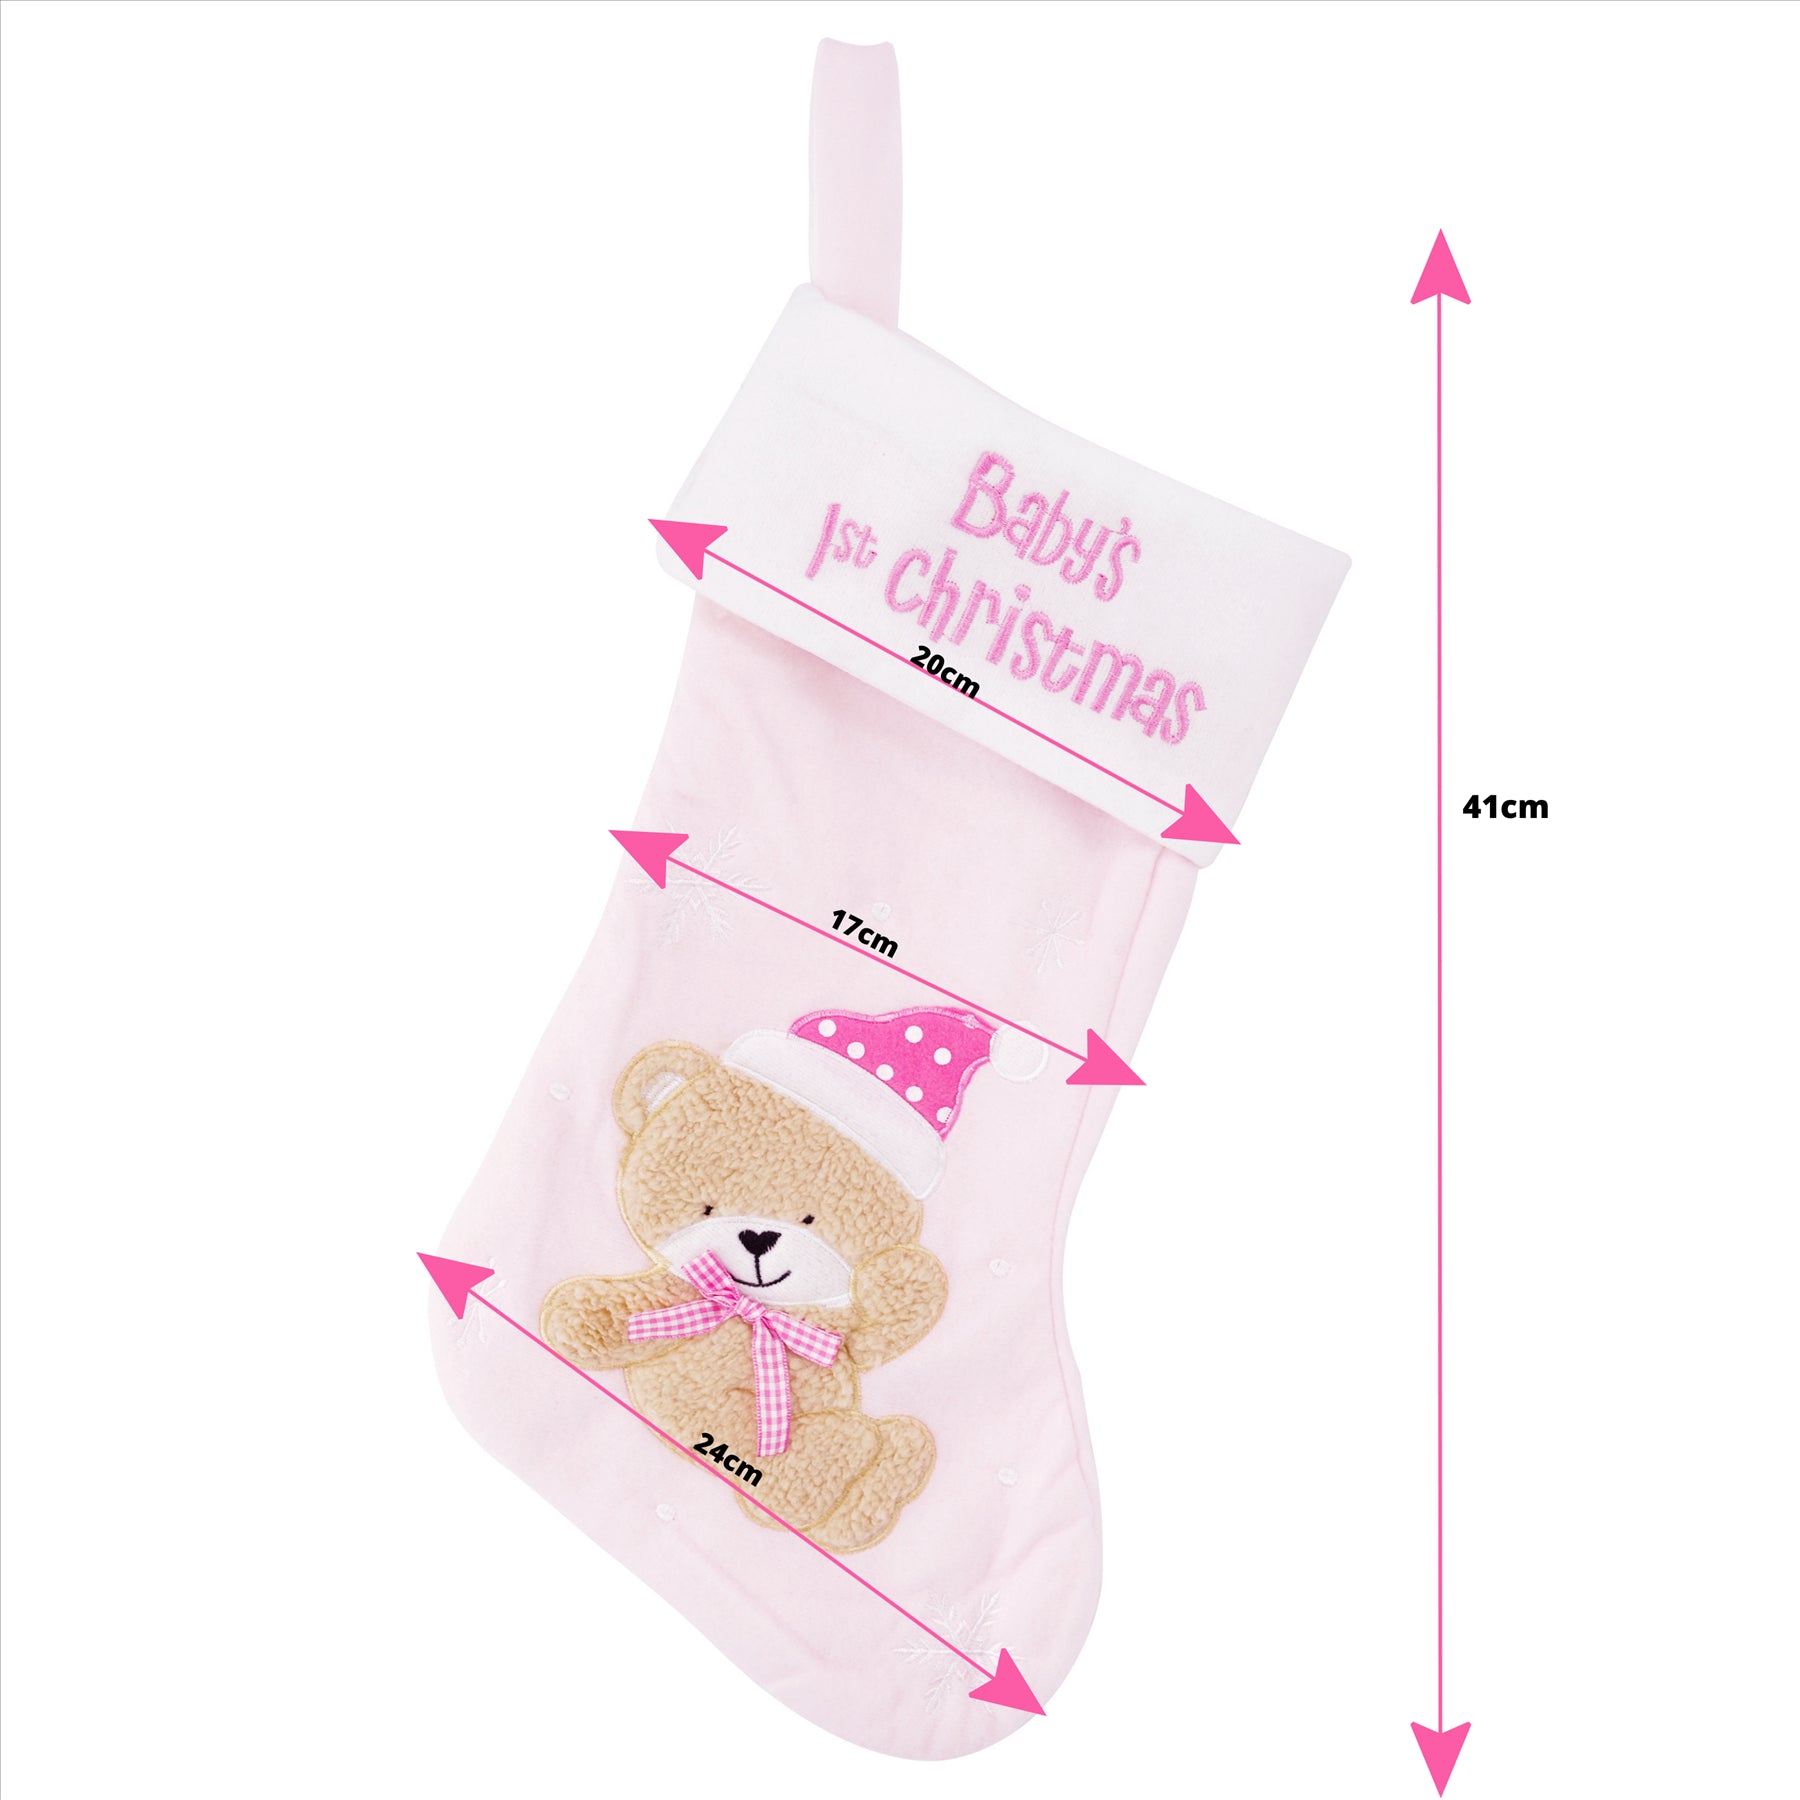 PINK BABY STOCKING by The Magic Toy Shop - UKBuyZone